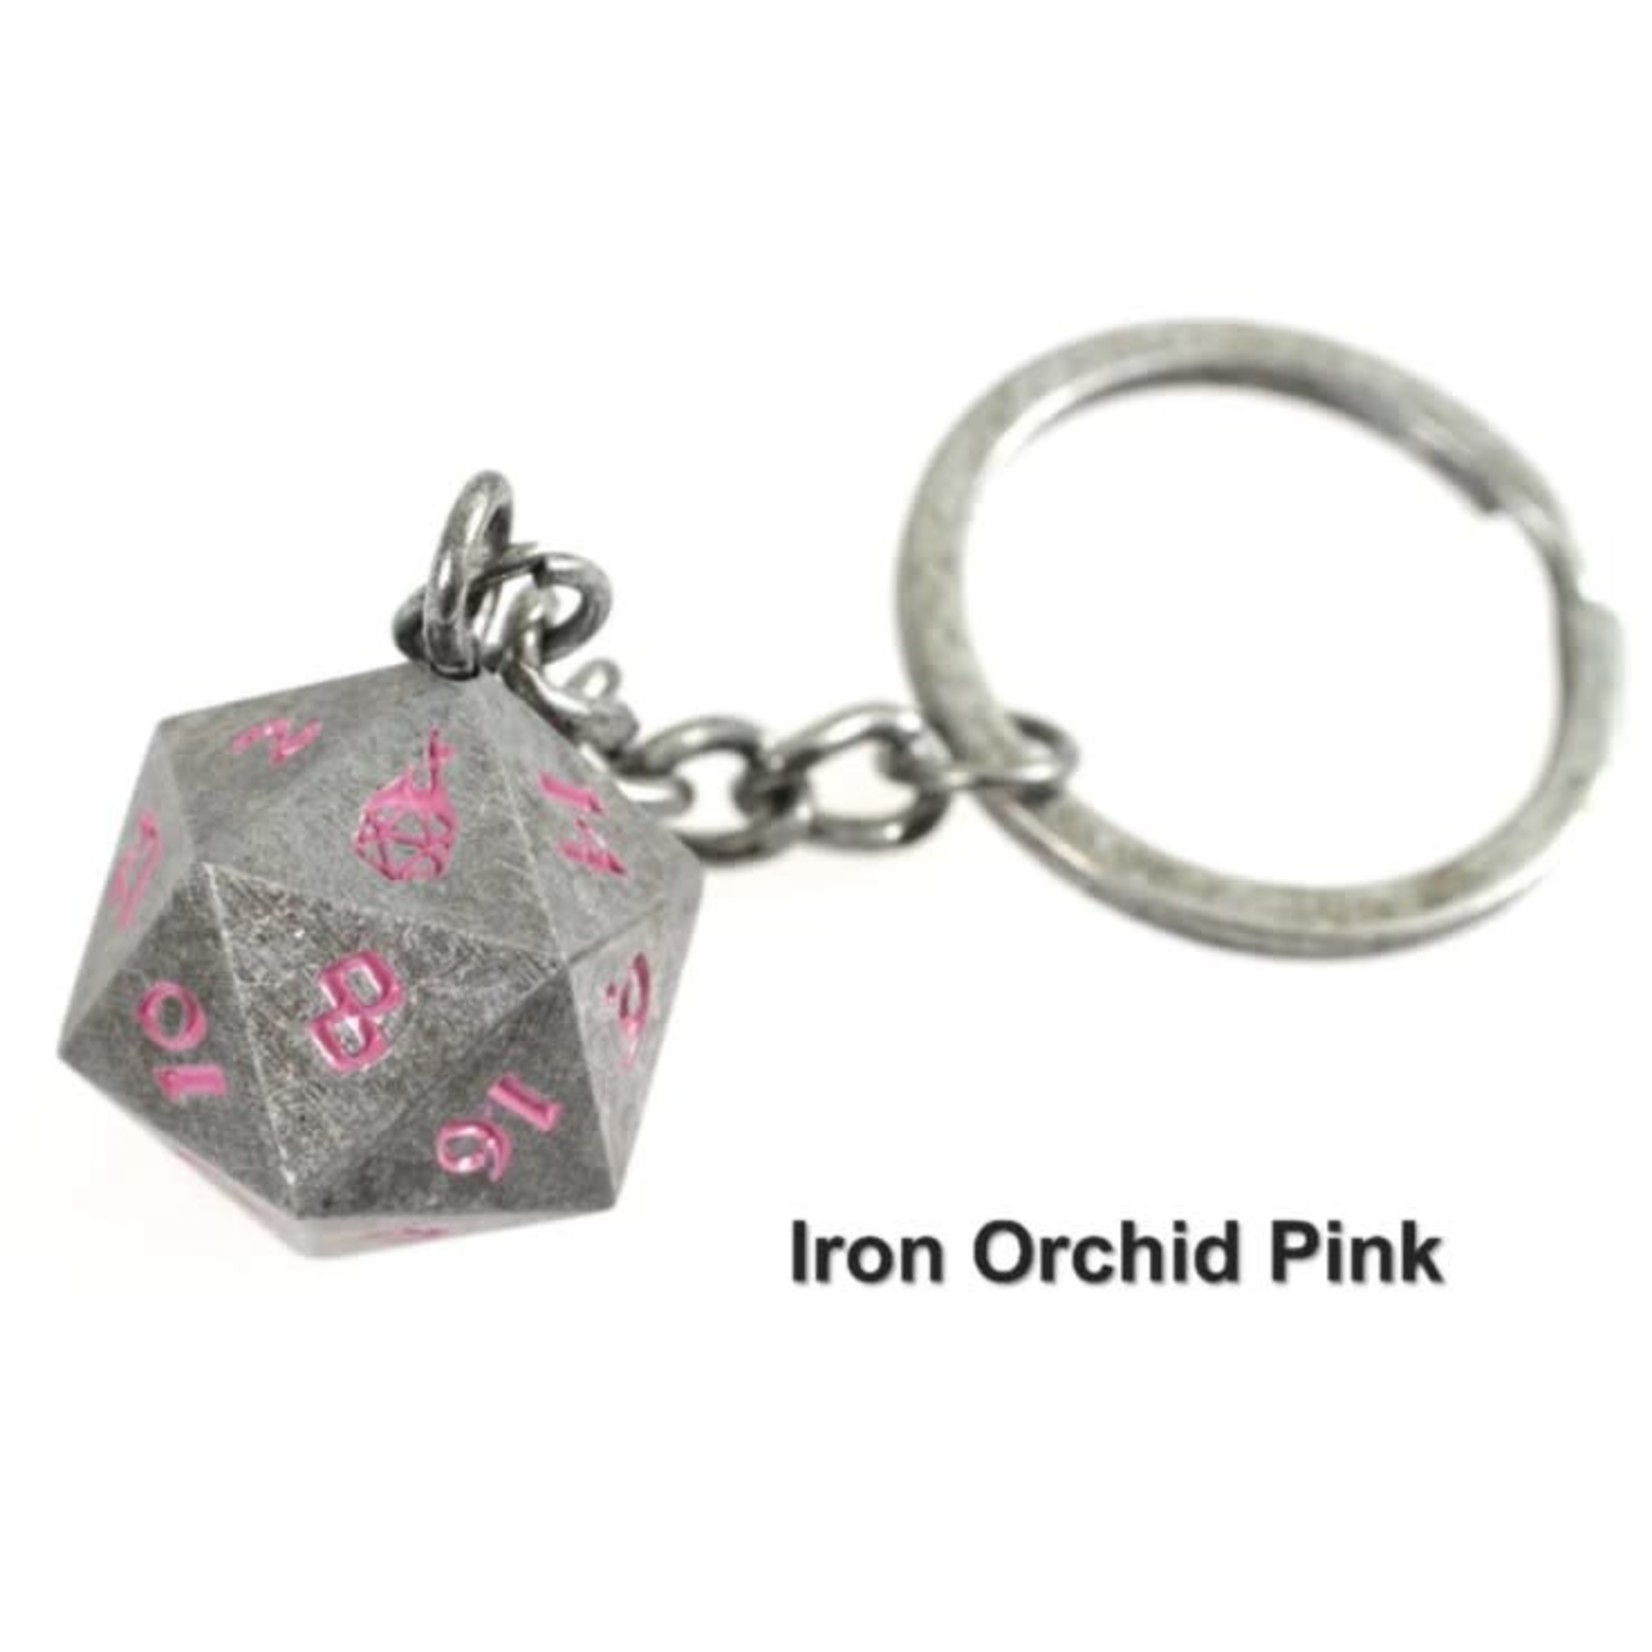 Forged Gaming Fob of Fate D20 Keychain: Iron Orchid Pink